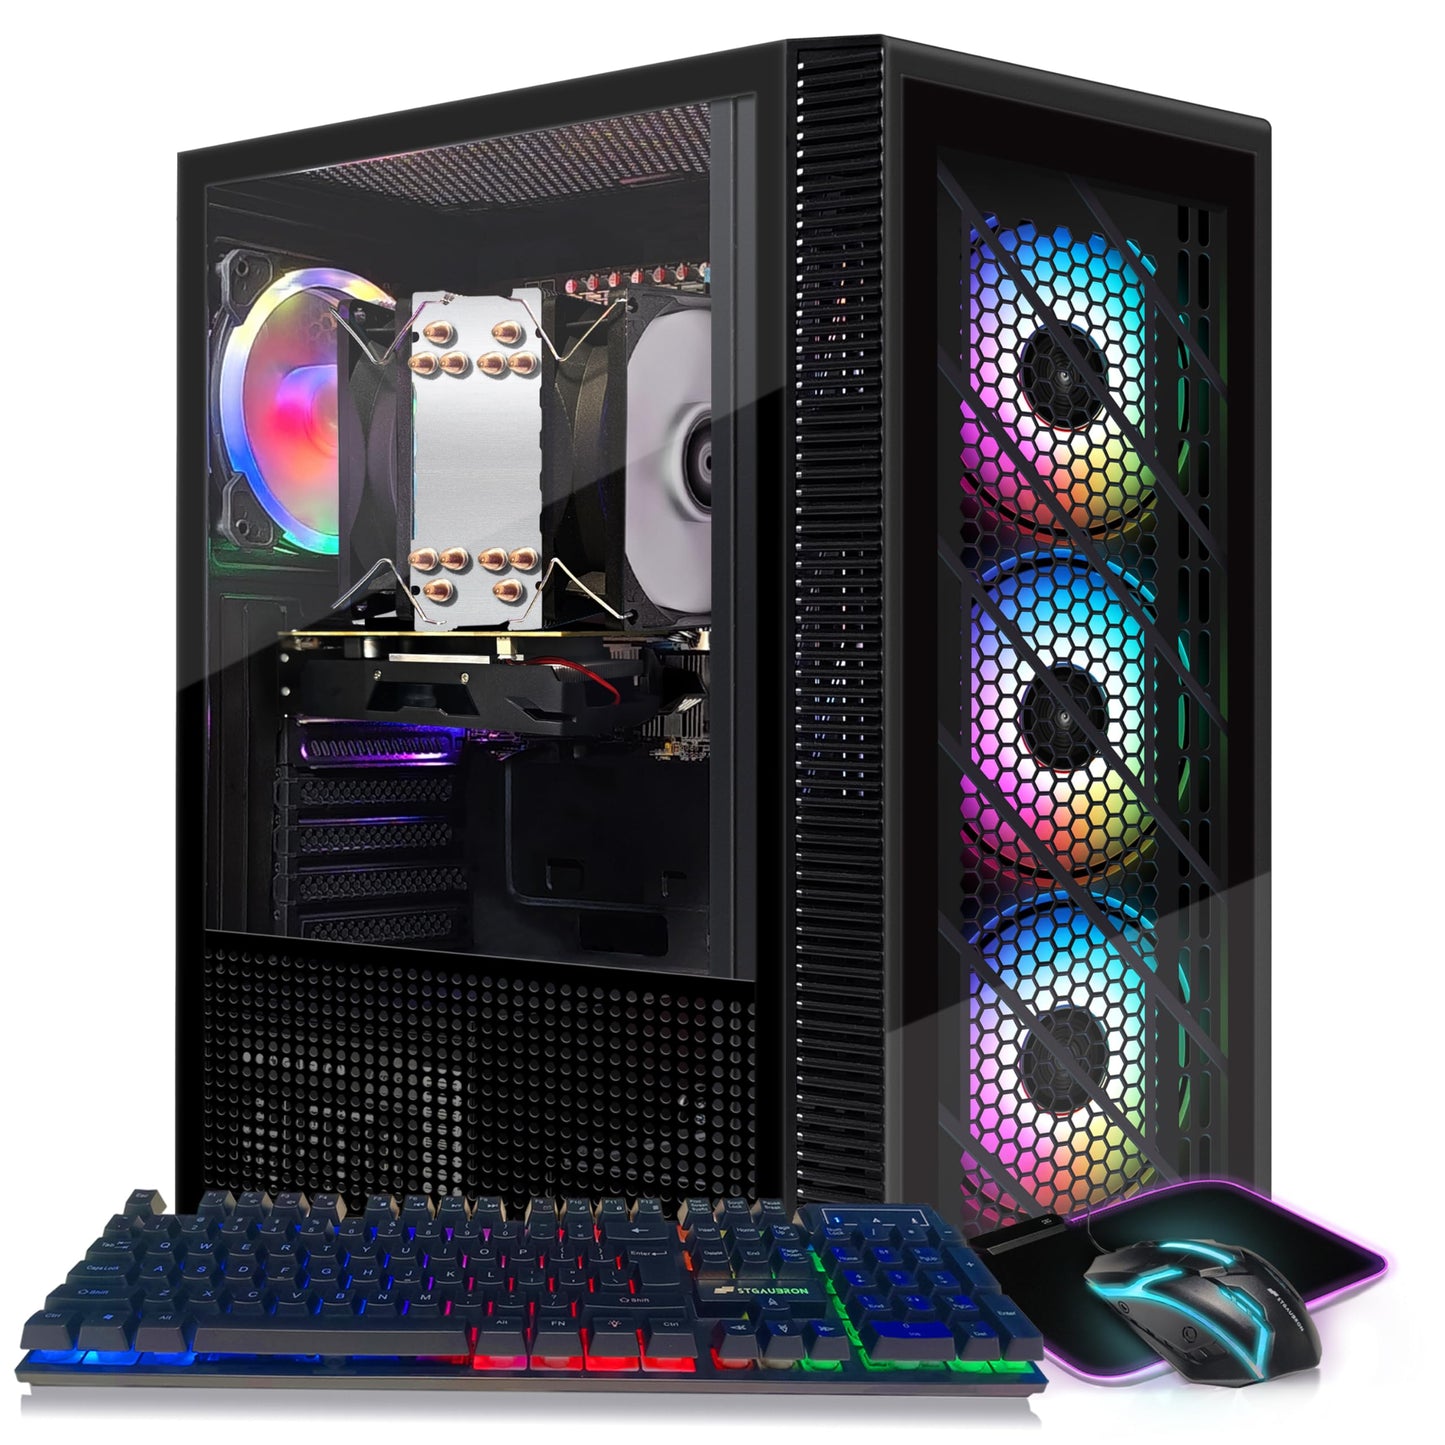 STGAubron-Gaming PC Computer Desktop-RX 550 4GB-Intel i7 Xeon E5 2.8GHz-16GB RAM-512GB SSD WiFi BT-5.0,W10H64, RGB Fanx4, RGB Keyboard & Mouse & Mouse Pad-Gaming Computer Tower-for Gamer,Streaming